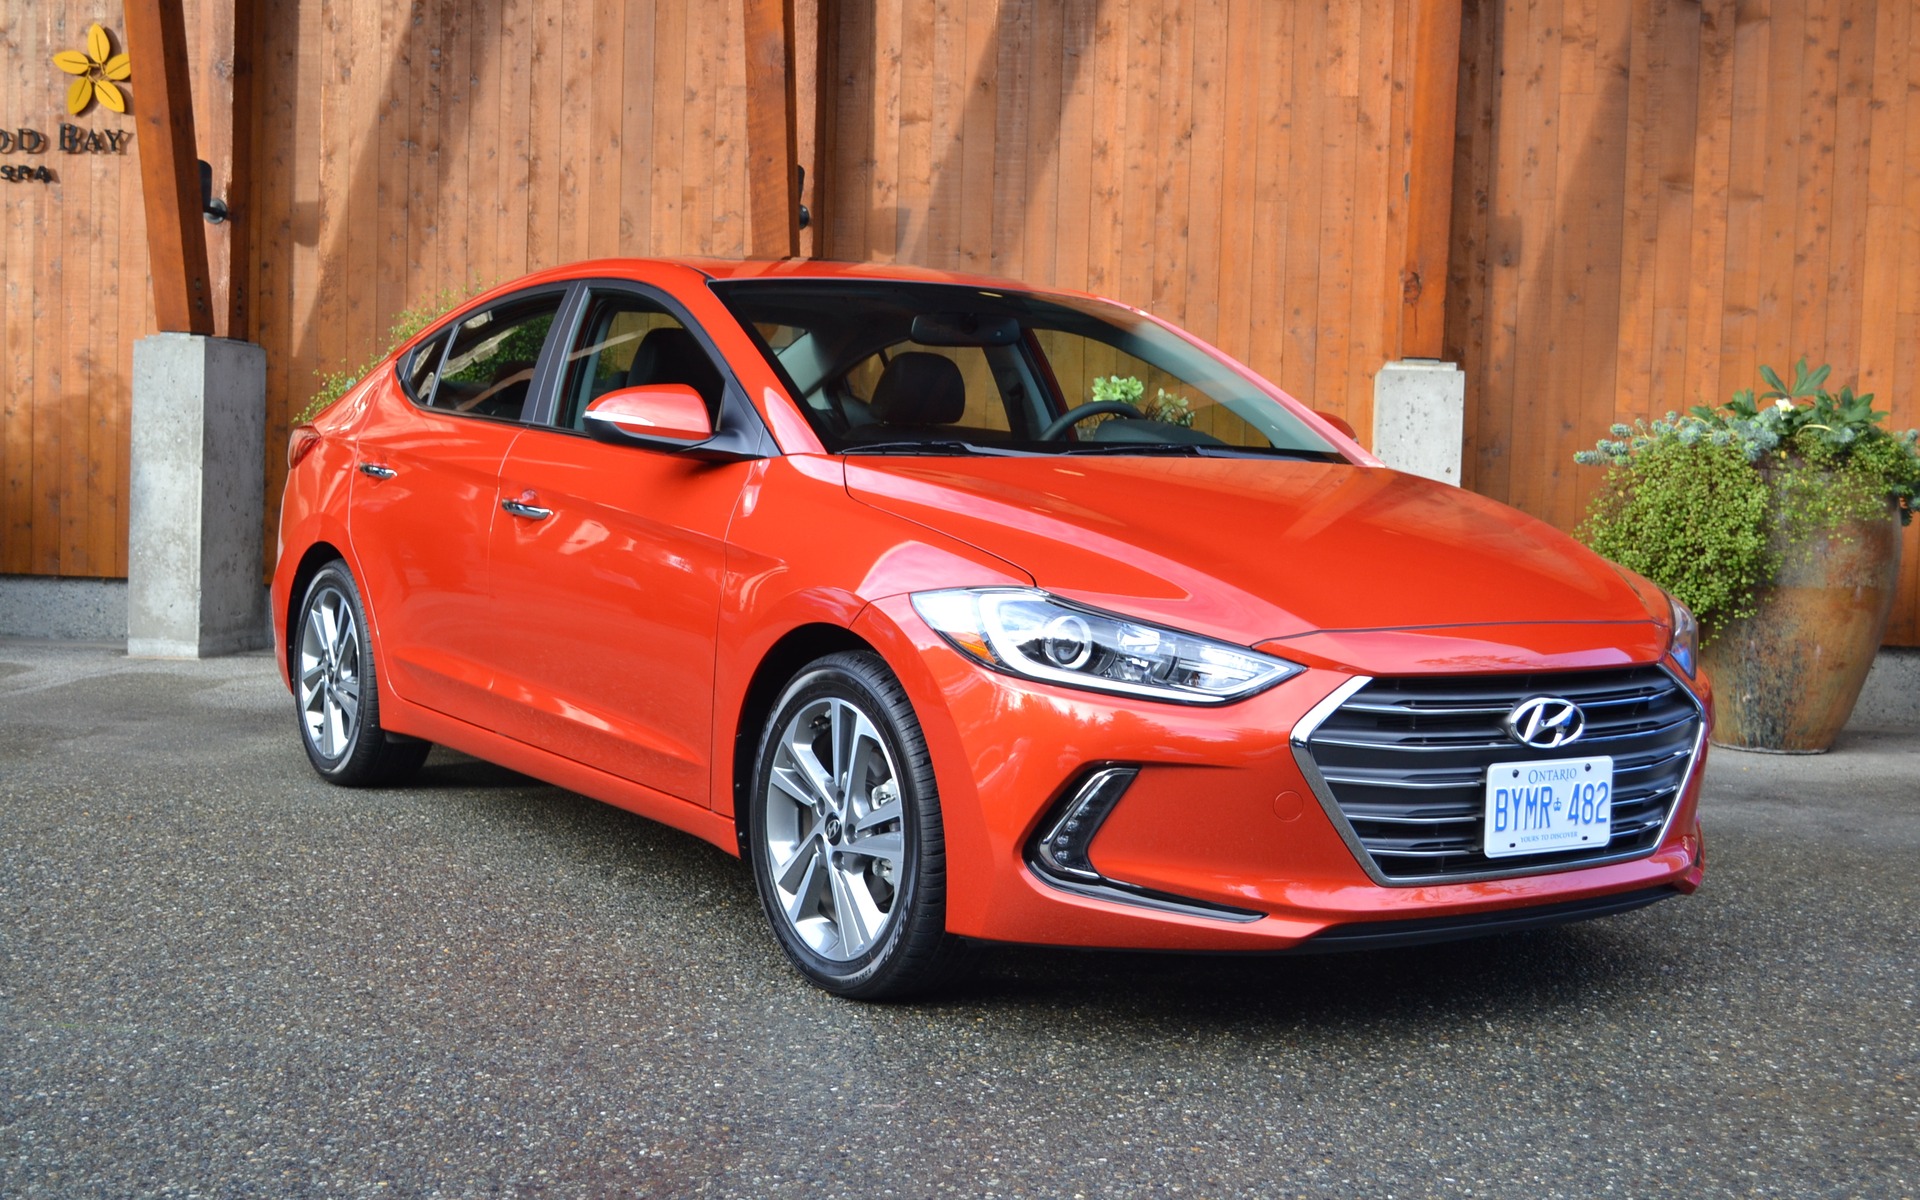 2017 hyundai elantra news reviews picture galleries and videos the car guide